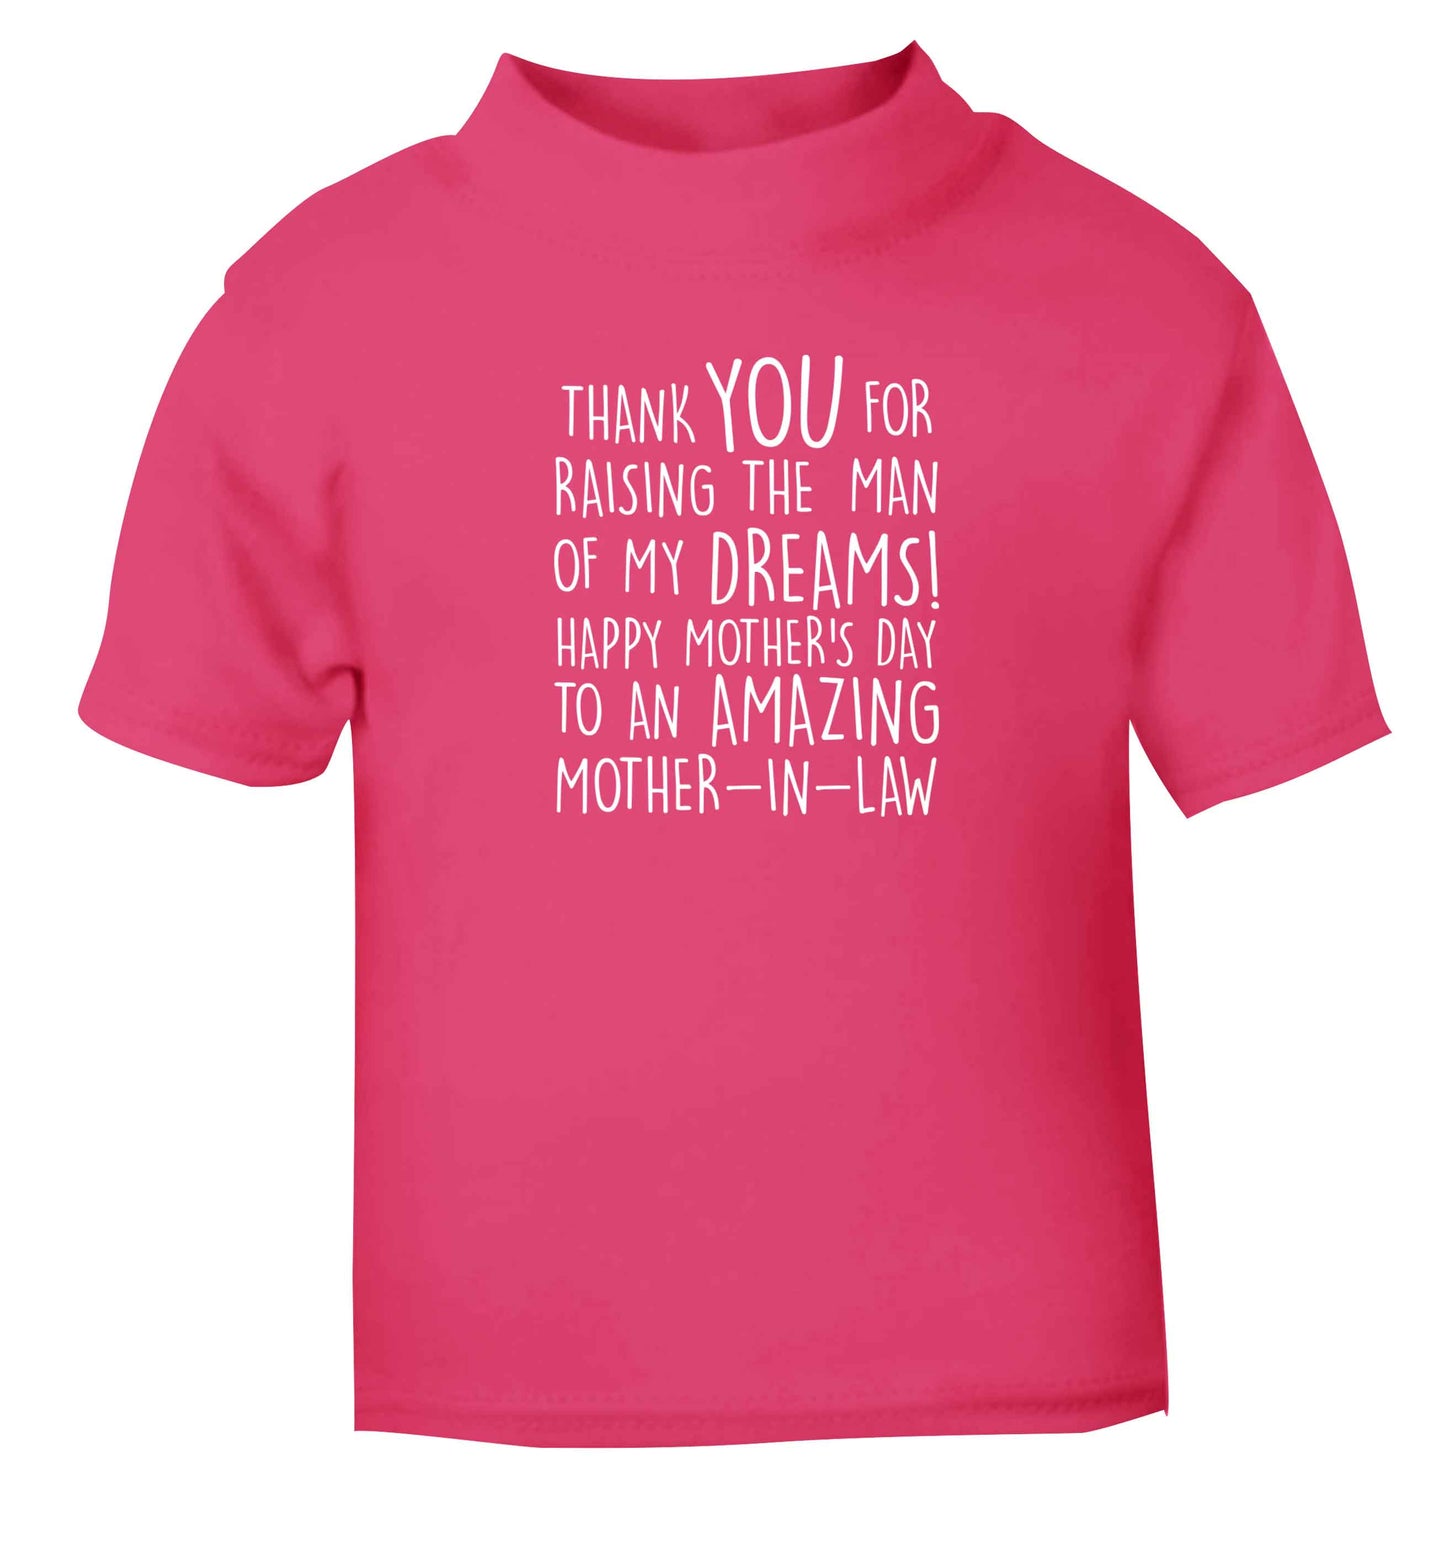 Raising the man of my dreams mother's day mother-in-law pink baby toddler Tshirt 2 Years